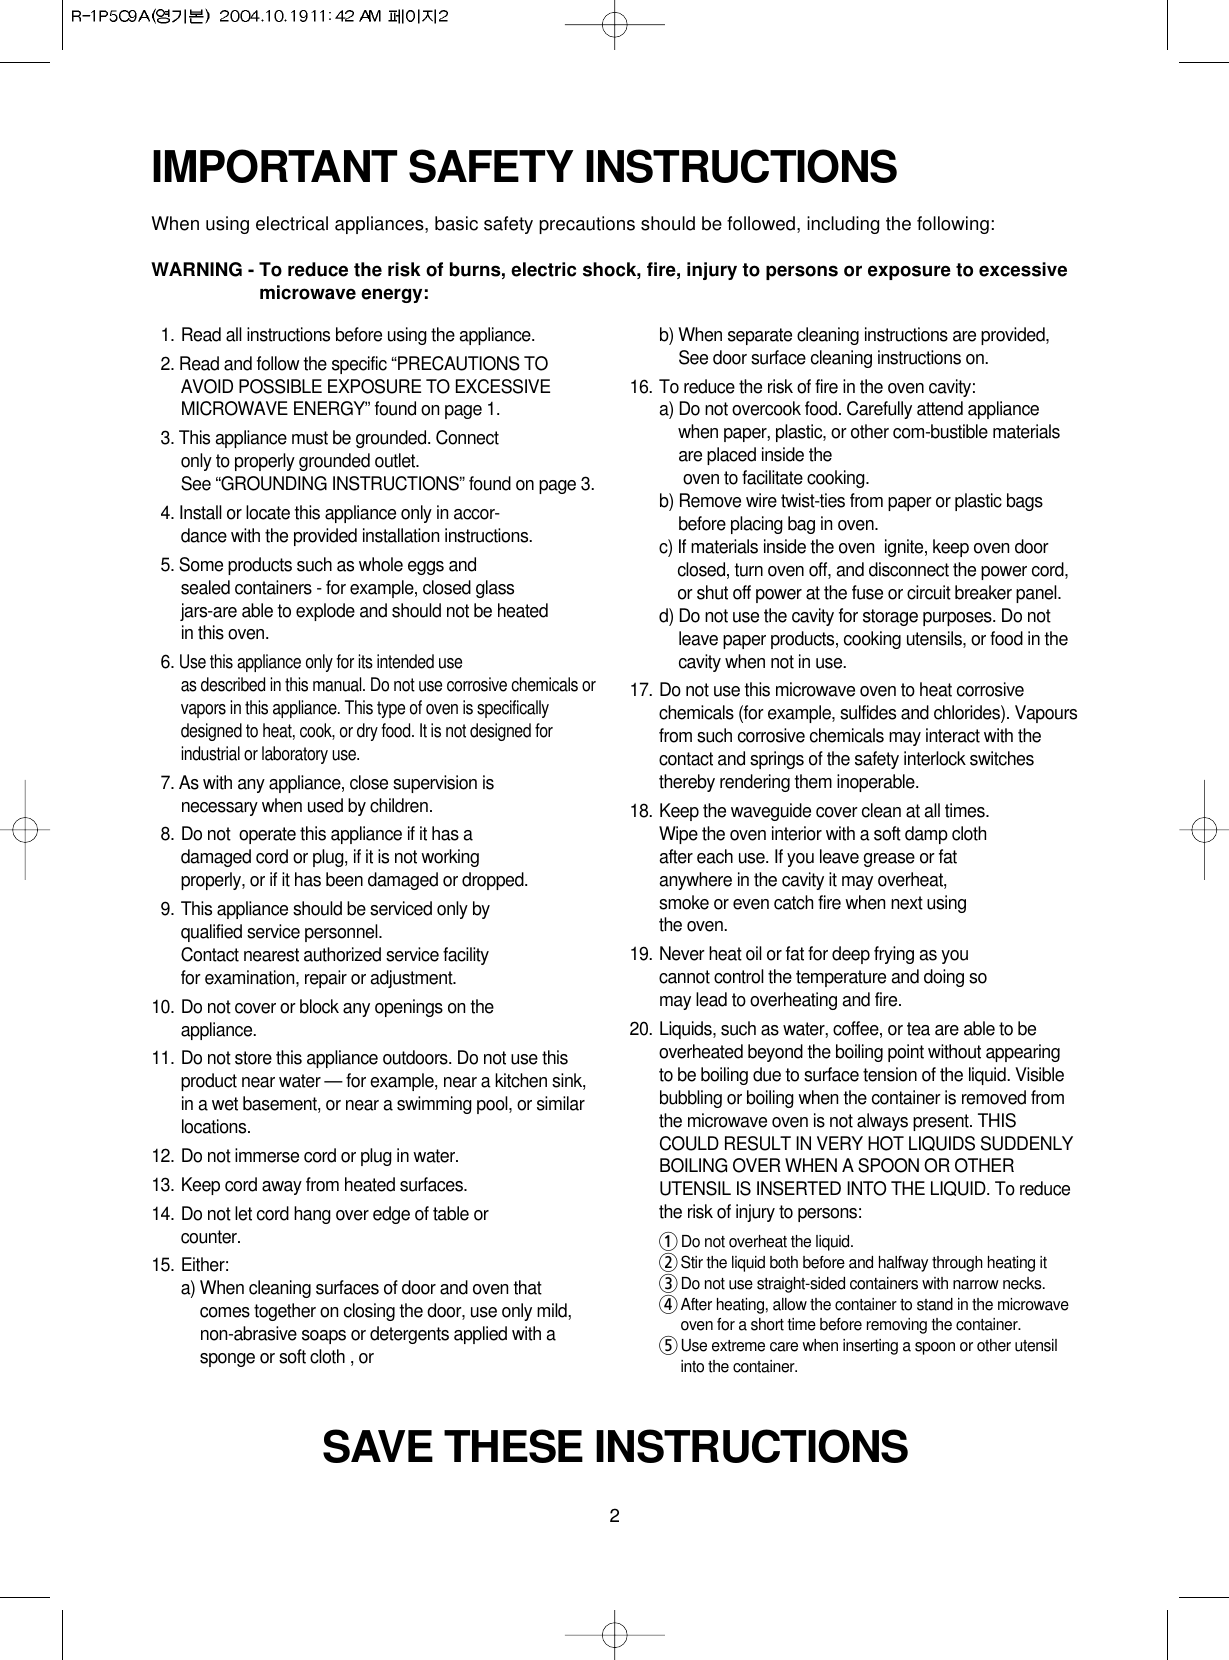 2IMPORTANT SAFETY INSTRUCTIONSWhen using electrical appliances, basic safety precautions should be followed, including the following:WARNING - To reduce the risk of burns, electric shock, fire, injury to persons or exposure to excessivemicrowave energy:SAVE THESE INSTRUCTIONS11. Read all instructions before using the appliance.12. Read and follow the specific “PRECAUTIONS TOAVOID POSSIBLE EXPOSURE TO EXCESSIVEMICROWAVE ENERGY” found on page 1.13. This appliance must be grounded. Connect only to properly grounded outlet. See “GROUNDING INSTRUCTIONS” found on page 3.14. Install or locate this appliance only in accor-dance with the provided installation instructions.15. Some products such as whole eggs and sealed containers - for example, closed glassjars-are able to explode and should not be heated in this oven.16. Use this appliance only for its intended use as described in this manual. Do not use corrosive chemicals orvapors in this appliance. This type of oven is specificallydesigned to heat, cook, or dry food. It is not designed forindustrial or laboratory use.17. As with any appliance, close supervision isnecessary when used by children.18. Do not  operate this appliance if it has adamaged cord or plug, if it is not workingproperly, or if it has been damaged or dropped.19. This appliance should be serviced only byqualified service personnel. Contact nearest authorized service facility for examination, repair or adjustment.10. Do not cover or block any openings on the       appliance. 11. Do not store this appliance outdoors. Do not use thisproduct near water — for example, near a kitchen sink,in a wet basement, or near a swimming pool, or similarlocations.12. Do not immerse cord or plug in water.13. Keep cord away from heated surfaces.14. Do not let cord hang over edge of table orcounter.15. Either:a) When cleaning surfaces of door and oven thatcomes together on closing the door, use only mild,non-abrasive soaps or detergents applied with asponge or soft cloth , orb) When separate cleaning instructions are provided,See door surface cleaning instructions on.16. To reduce the risk of fire in the oven cavity:a) Do not overcook food. Carefully attend appliancewhen paper, plastic, or other com-bustible materialsare placed inside theoven to facilitate cooking.b) Remove wire twist-ties from paper or plastic bagsbefore placing bag in oven.c) If materials inside the oven  ignite, keep oven doorclosed, turn oven off, and disconnect the power cord,or shut off power at the fuse or circuit breaker panel.d) Do not use the cavity for storage purposes. Do notleave paper products, cooking utensils, or food in thecavity when not in use.17. Do not use this microwave oven to heat corrosivechemicals (for example, sulfides and chlorides). Vapoursfrom such corrosive chemicals may interact with thecontact and springs of the safety interlock switchesthereby rendering them inoperable.18. Keep the waveguide cover clean at all times.Wipe the oven interior with a soft damp clothafter each use. If you leave grease or fatanywhere in the cavity it may overheat, smoke or even catch fire when next usingthe oven.19. Never heat oil or fat for deep frying as youcannot control the temperature and doing somay lead to overheating and fire.20. Liquids, such as water, coffee, or tea are able to beoverheated beyond the boiling point without appearingto be boiling due to surface tension of the liquid. Visiblebubbling or boiling when the container is removed fromthe microwave oven is not always present. THISCOULD RESULT IN VERY HOT LIQUIDS SUDDENLYBOILING OVER WHEN A SPOON OR OTHERUTENSIL IS INSERTED INTO THE LIQUID. To reducethe risk of injury to persons:1Do not overheat the liquid.2Stir the liquid both before and halfway through heating it3Do not use straight-sided containers with narrow necks.4After heating, allow the container to stand in the microwaveoven for a short time before removing the container.5Use extreme care when inserting a spoon or other utensilinto the container.